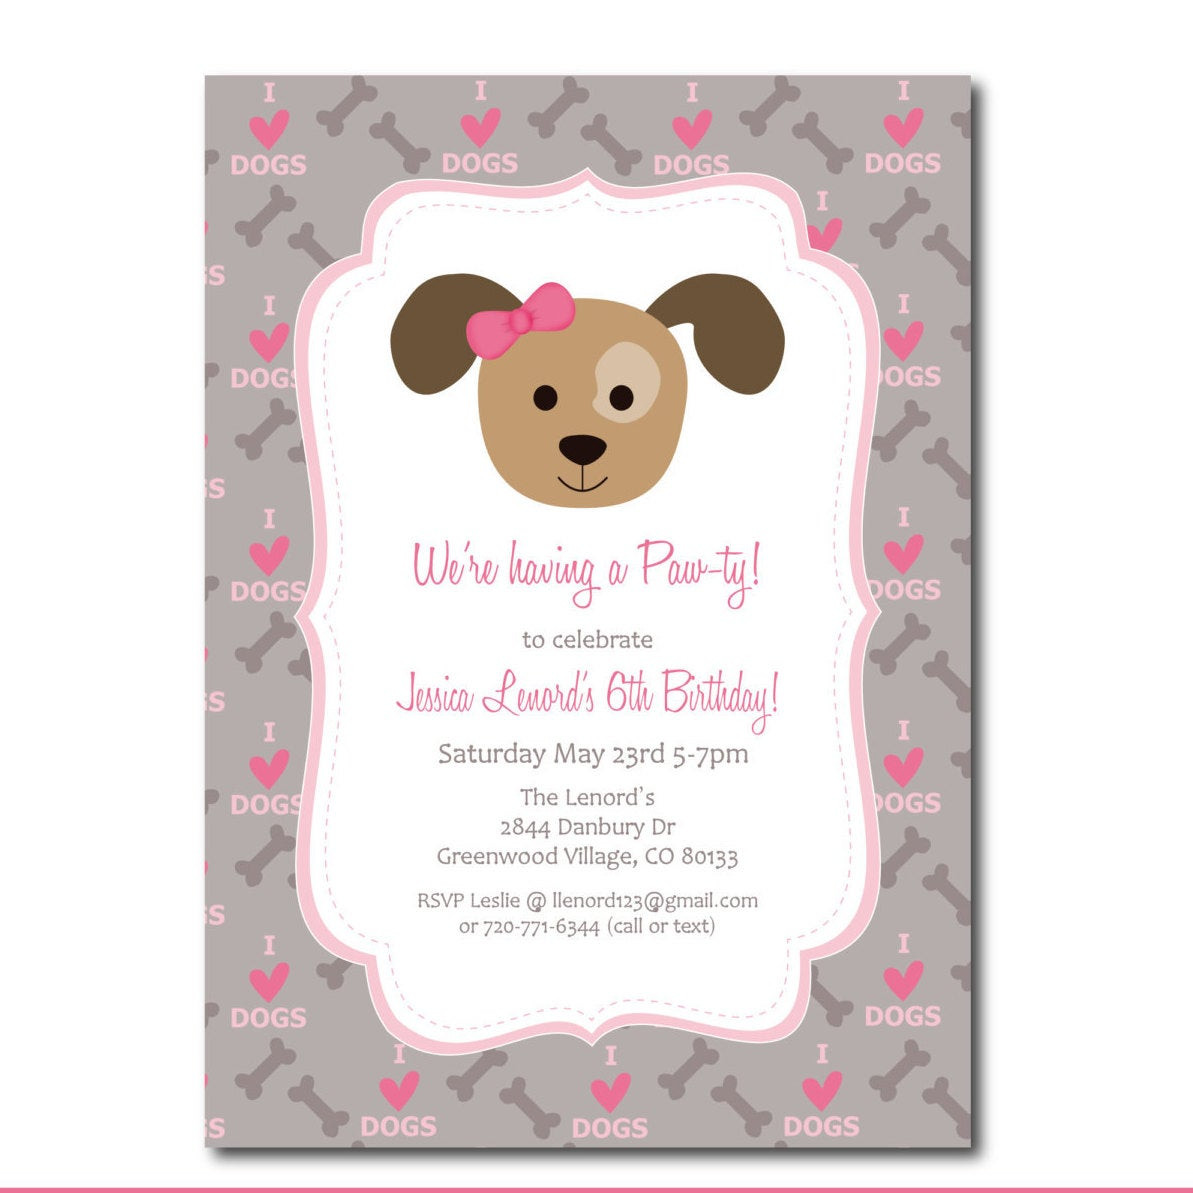 Dog Birthday Party Invitations
 Puppy Party Invitation with Editable Text Dog Party